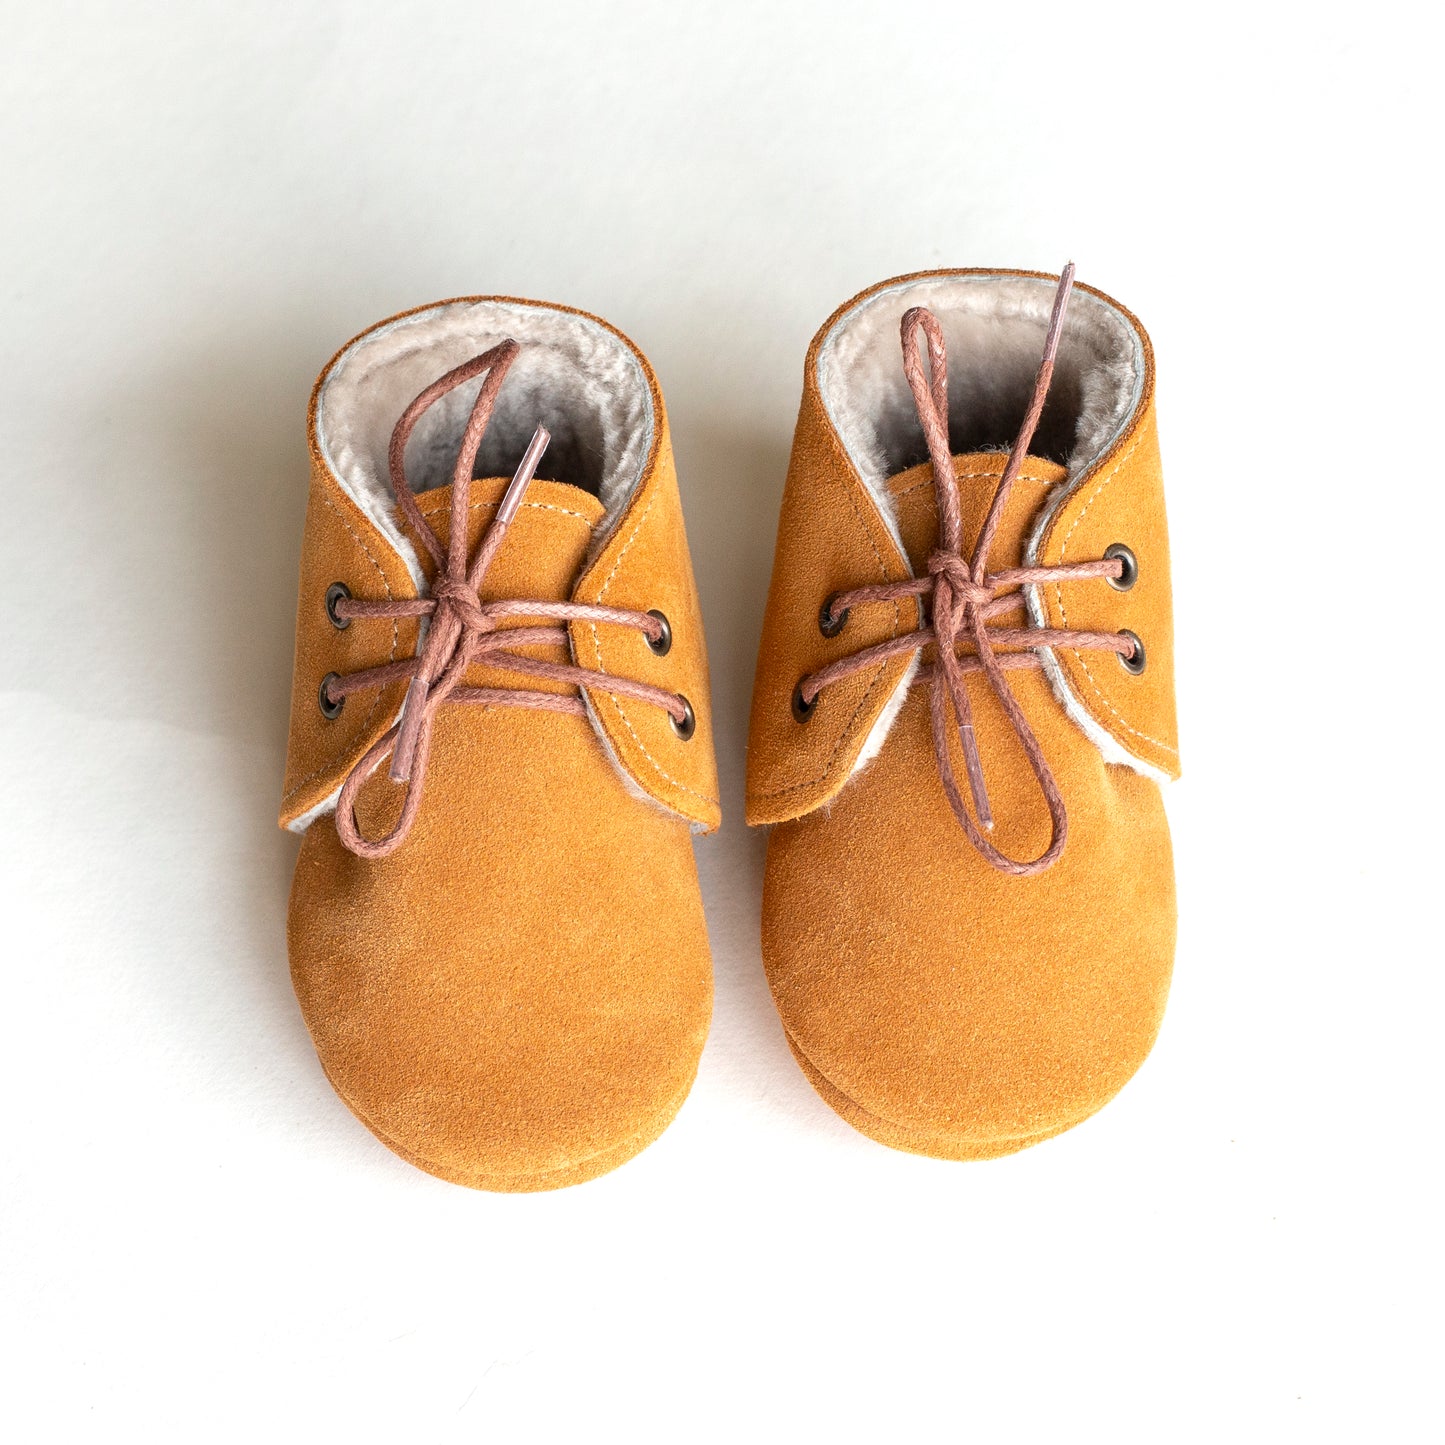 Suede winter toddler shoes